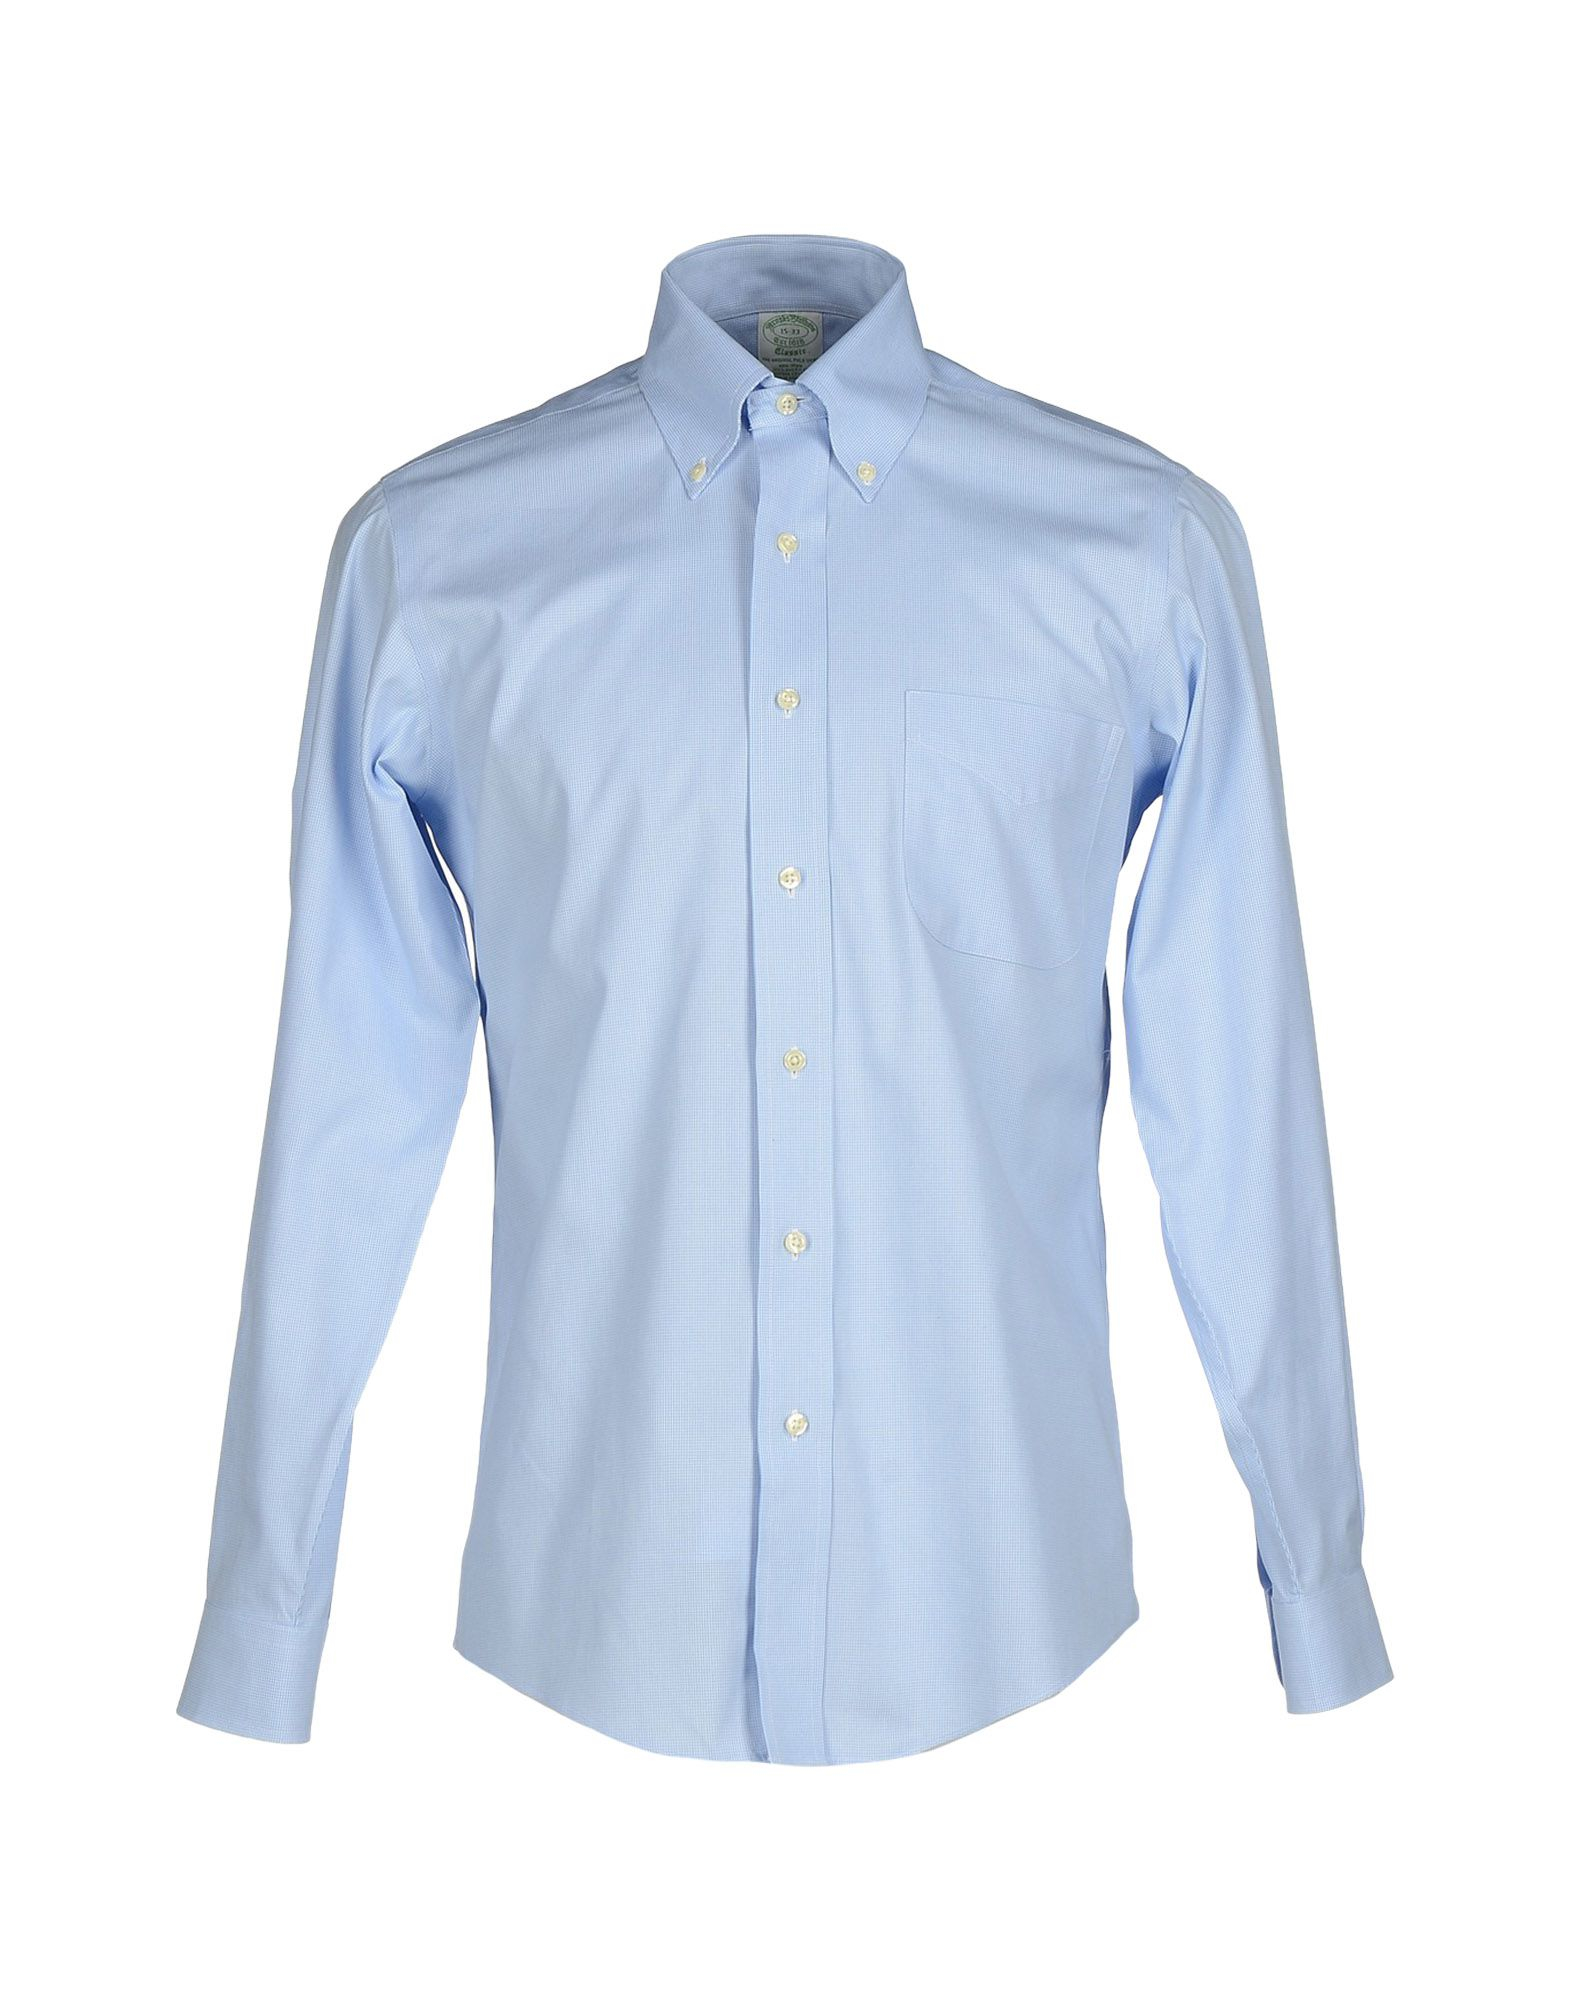 Lyst - Brooks Brothers Shirt in Blue for Men